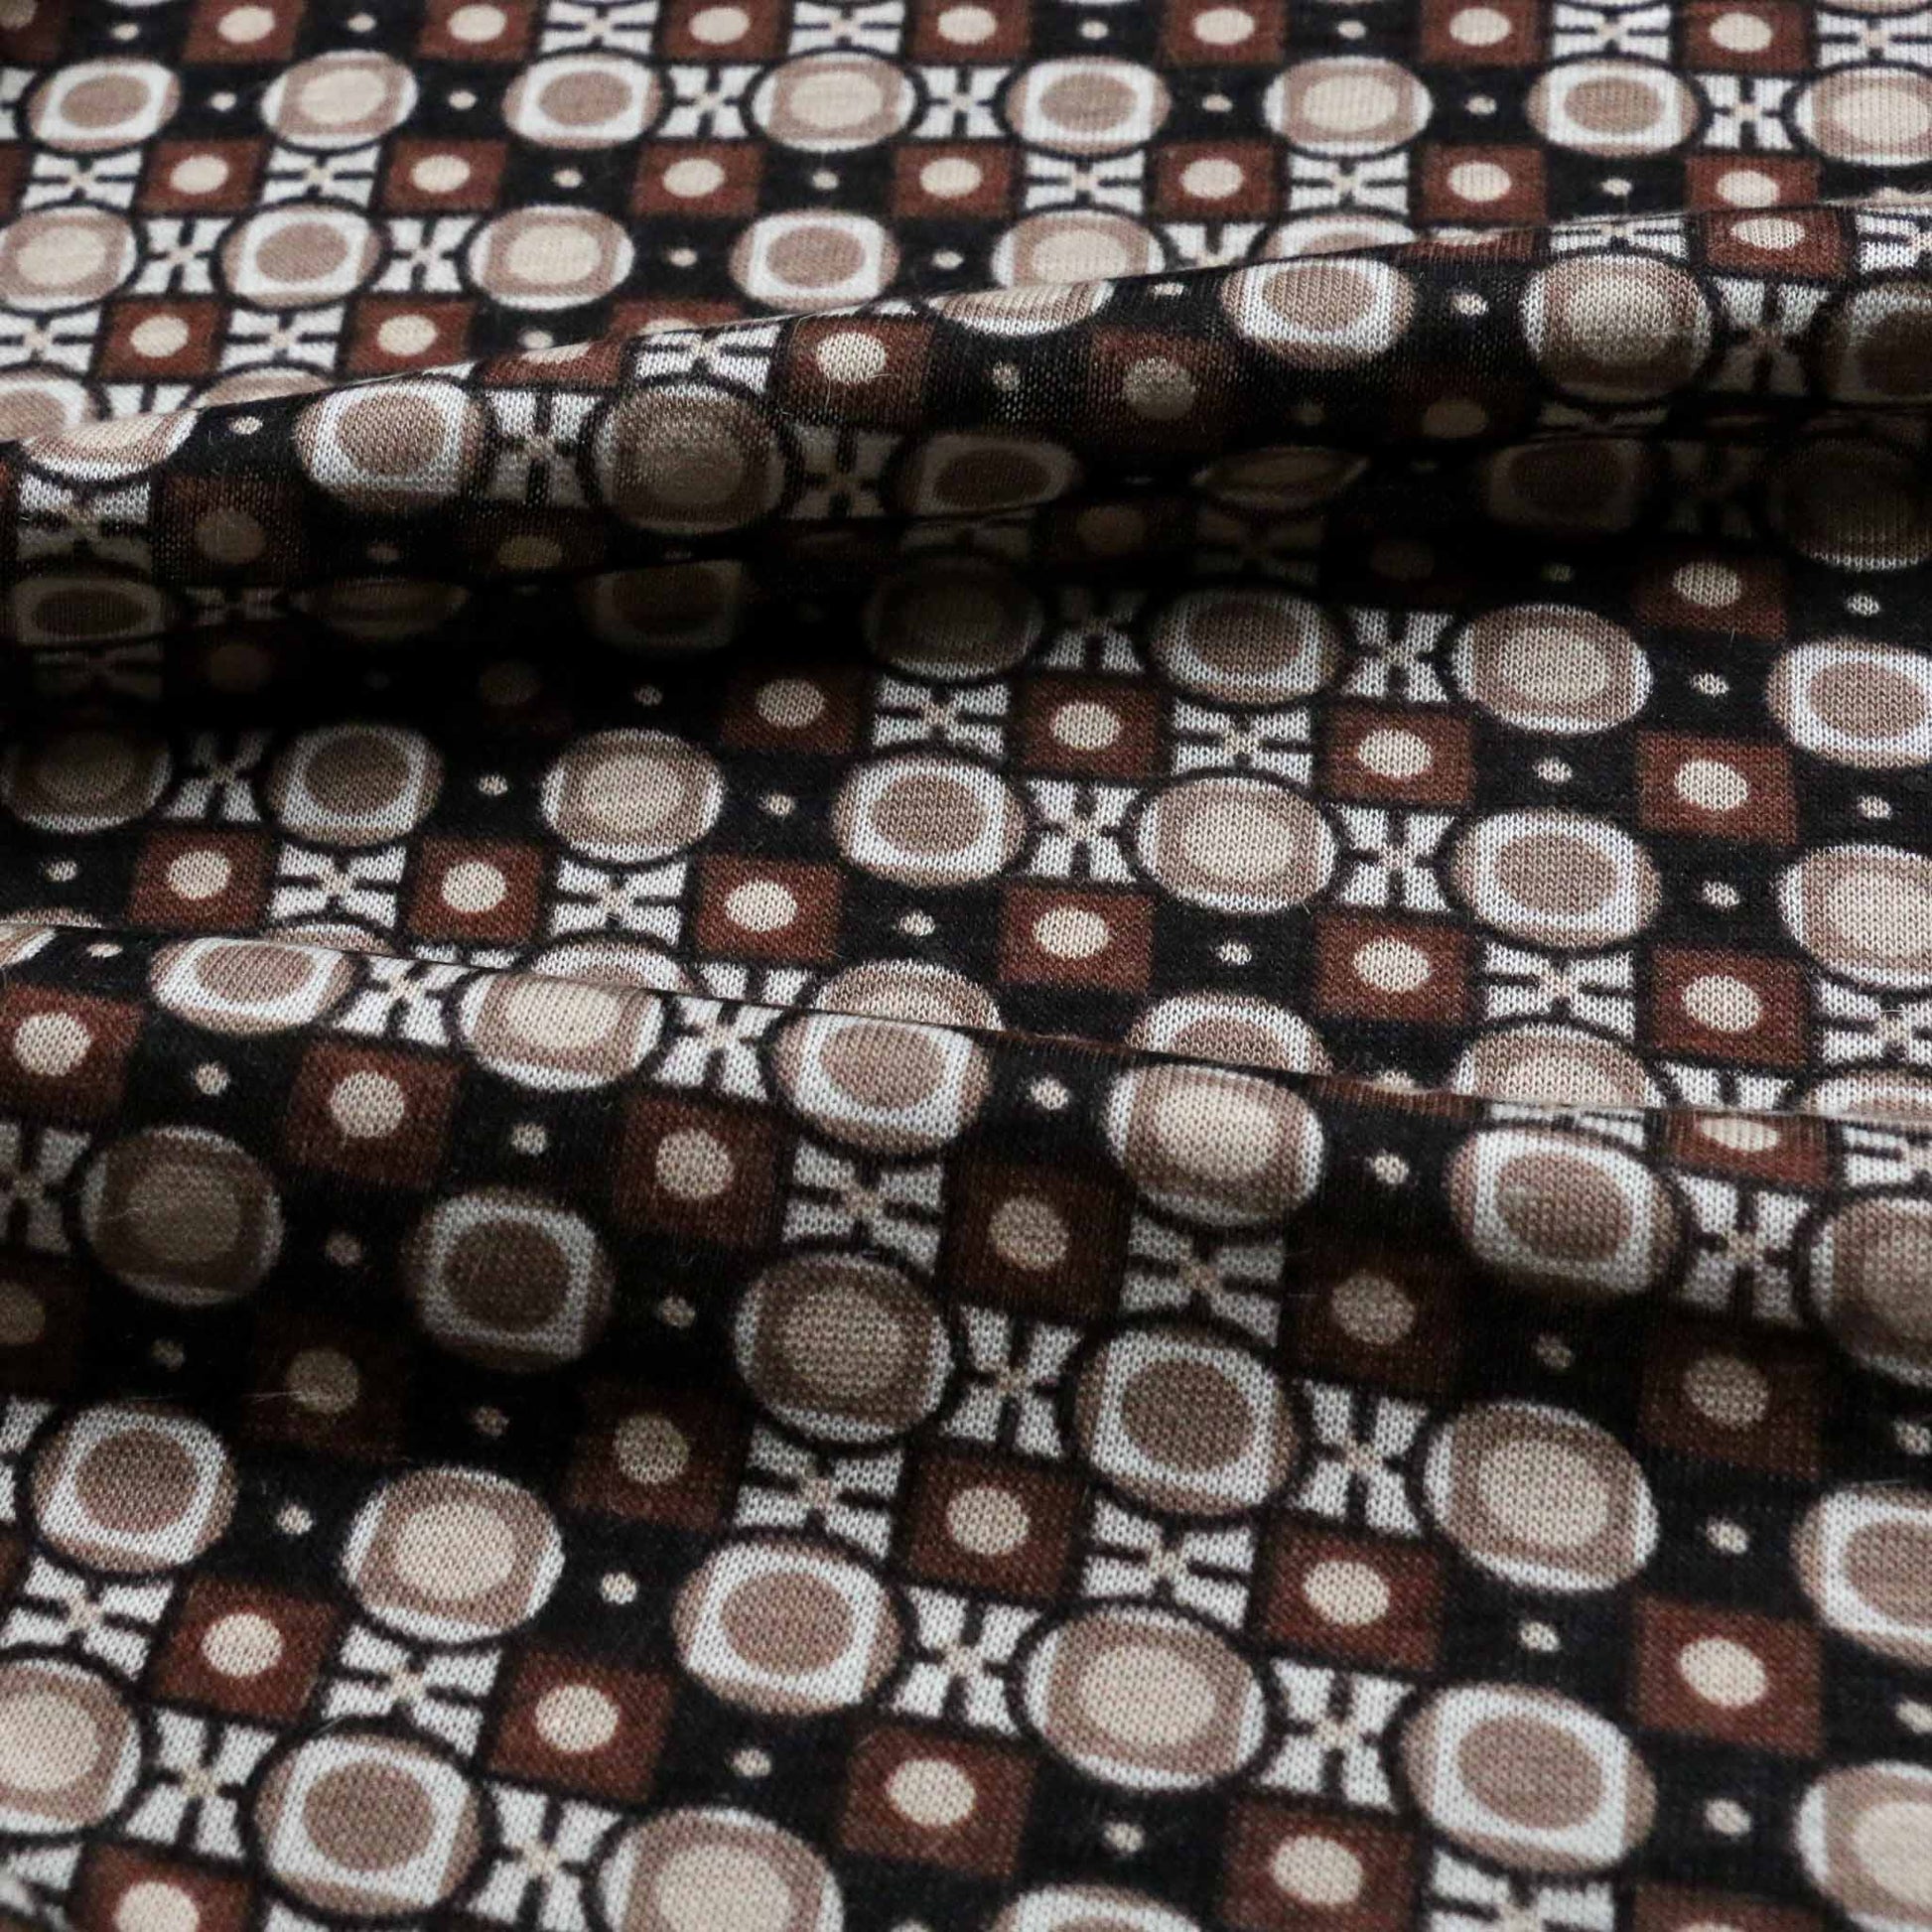 brown and black vintage sustainable deadstock jersey dressmaking fabric with retro print design